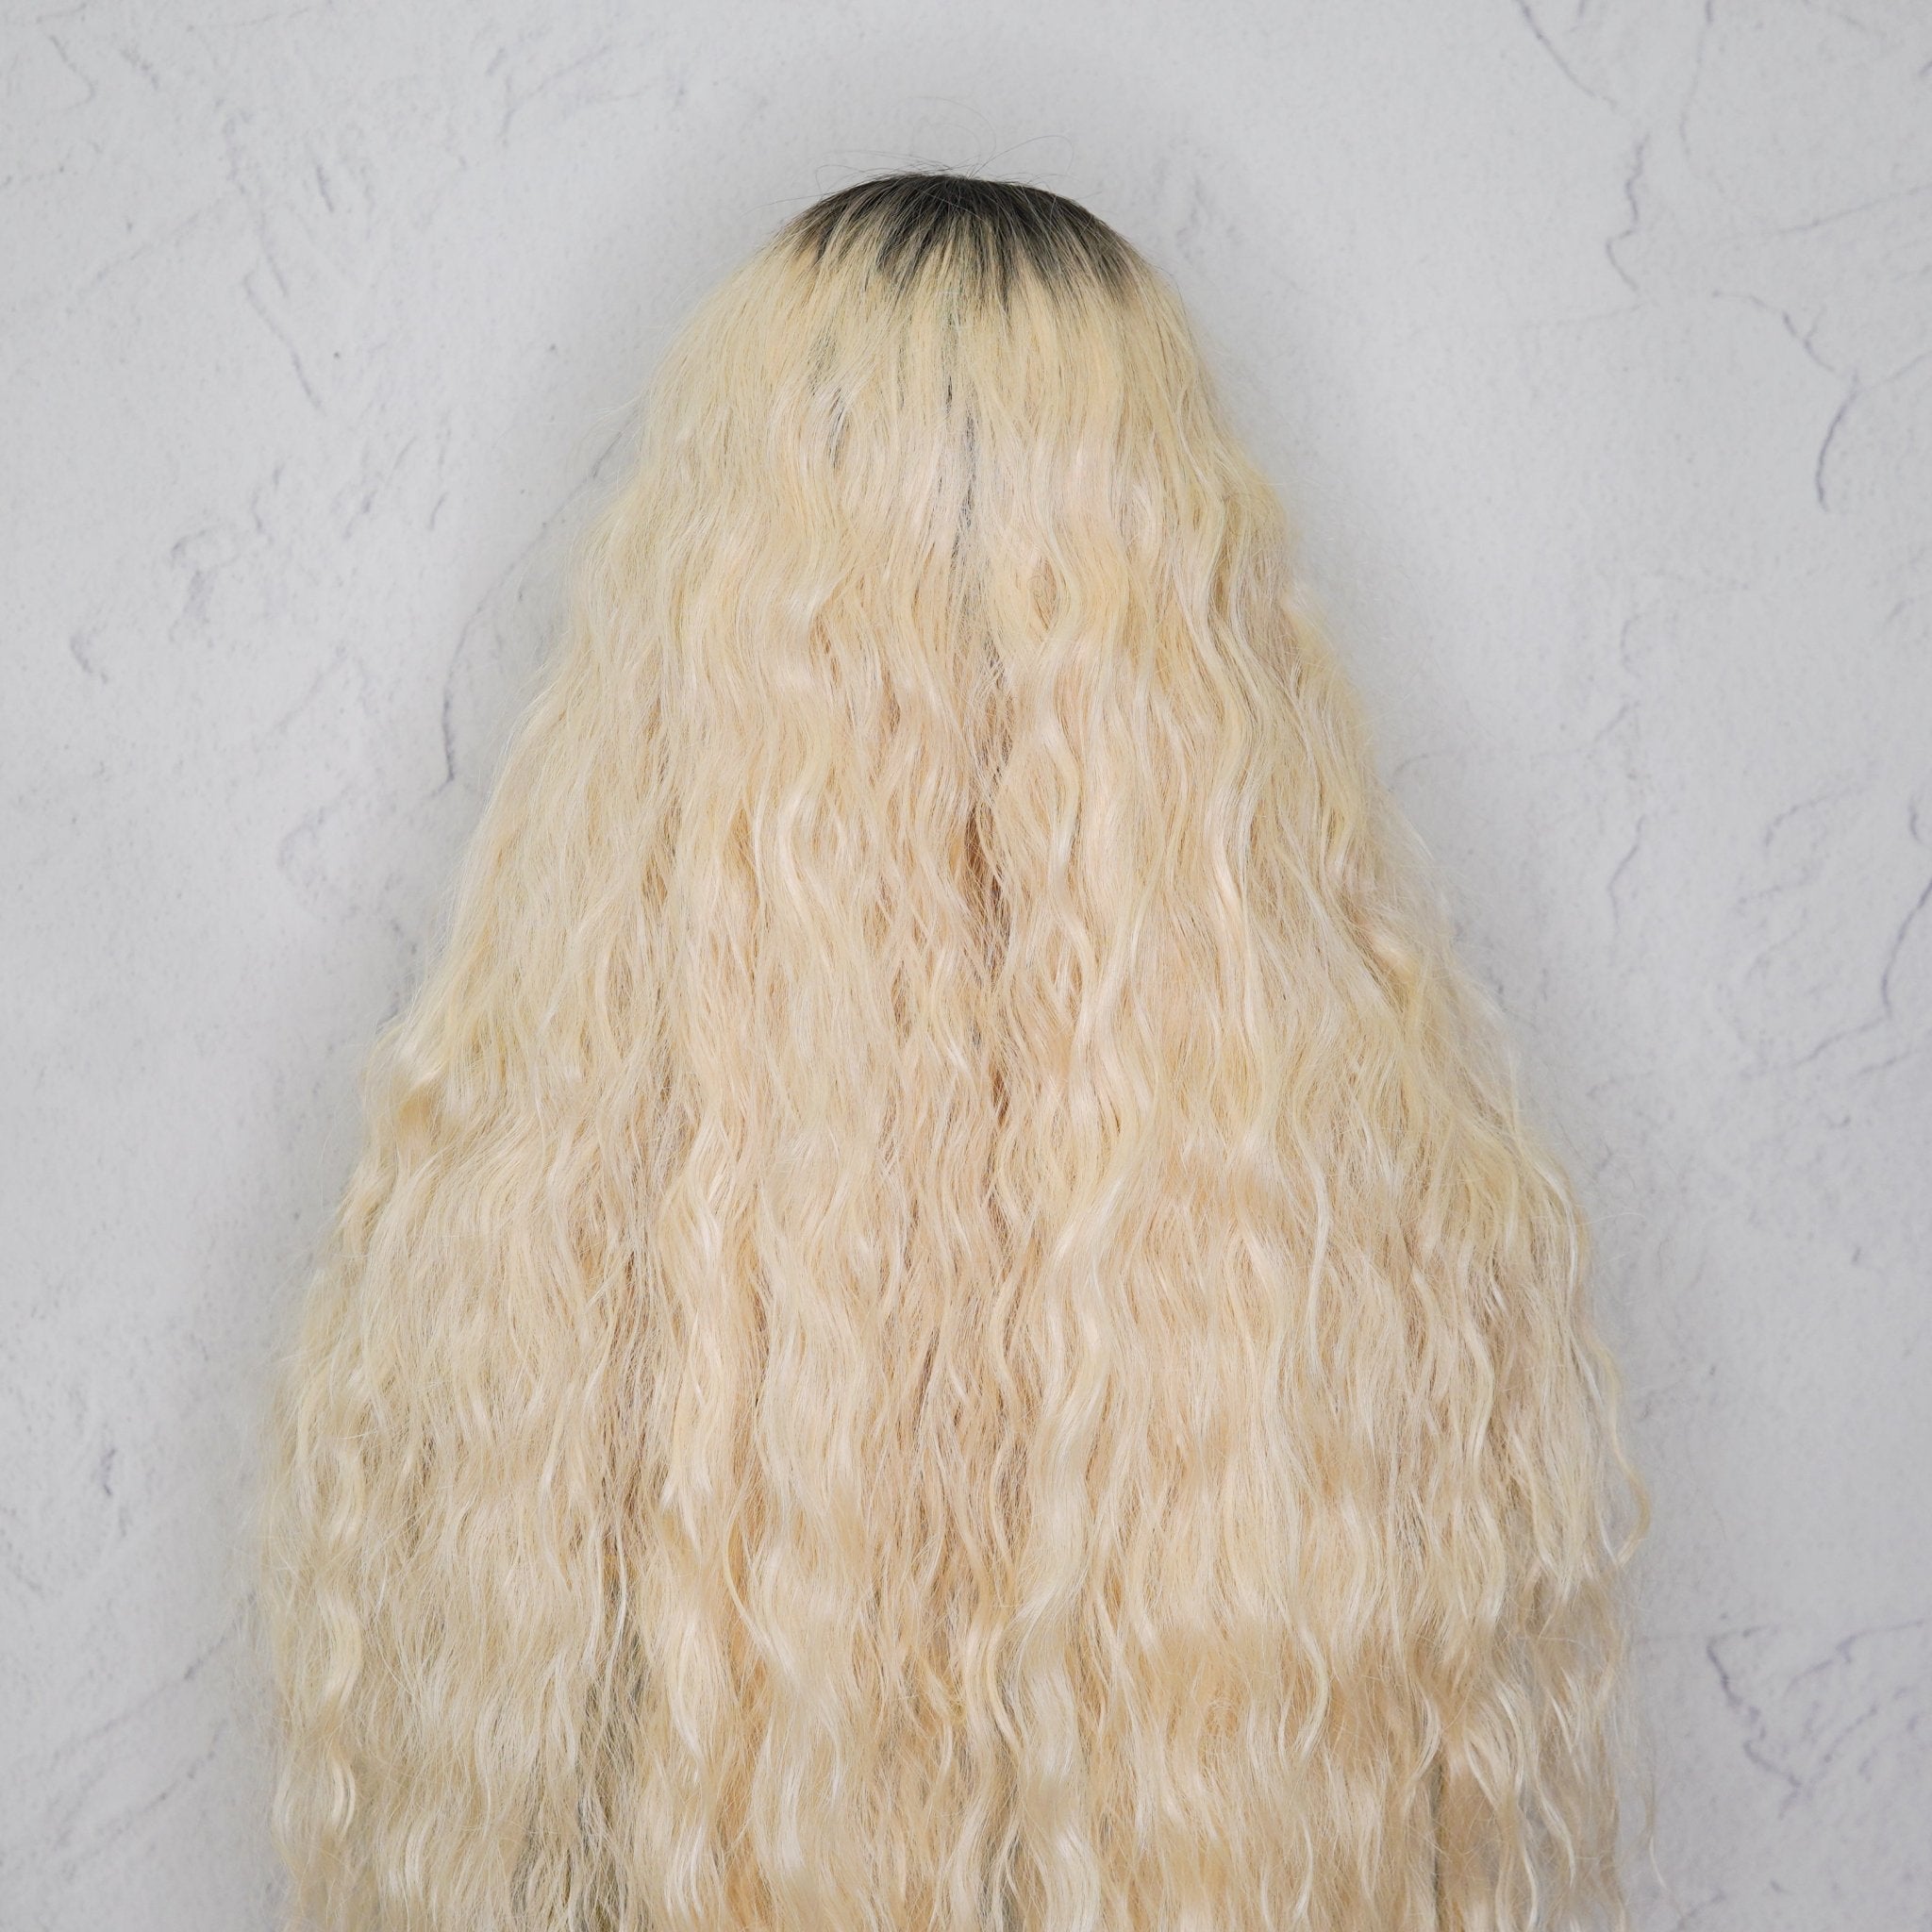 PAM Ombre Lace Front Wig ** SAMPLE WITH CUT LACE - Milk & Honey